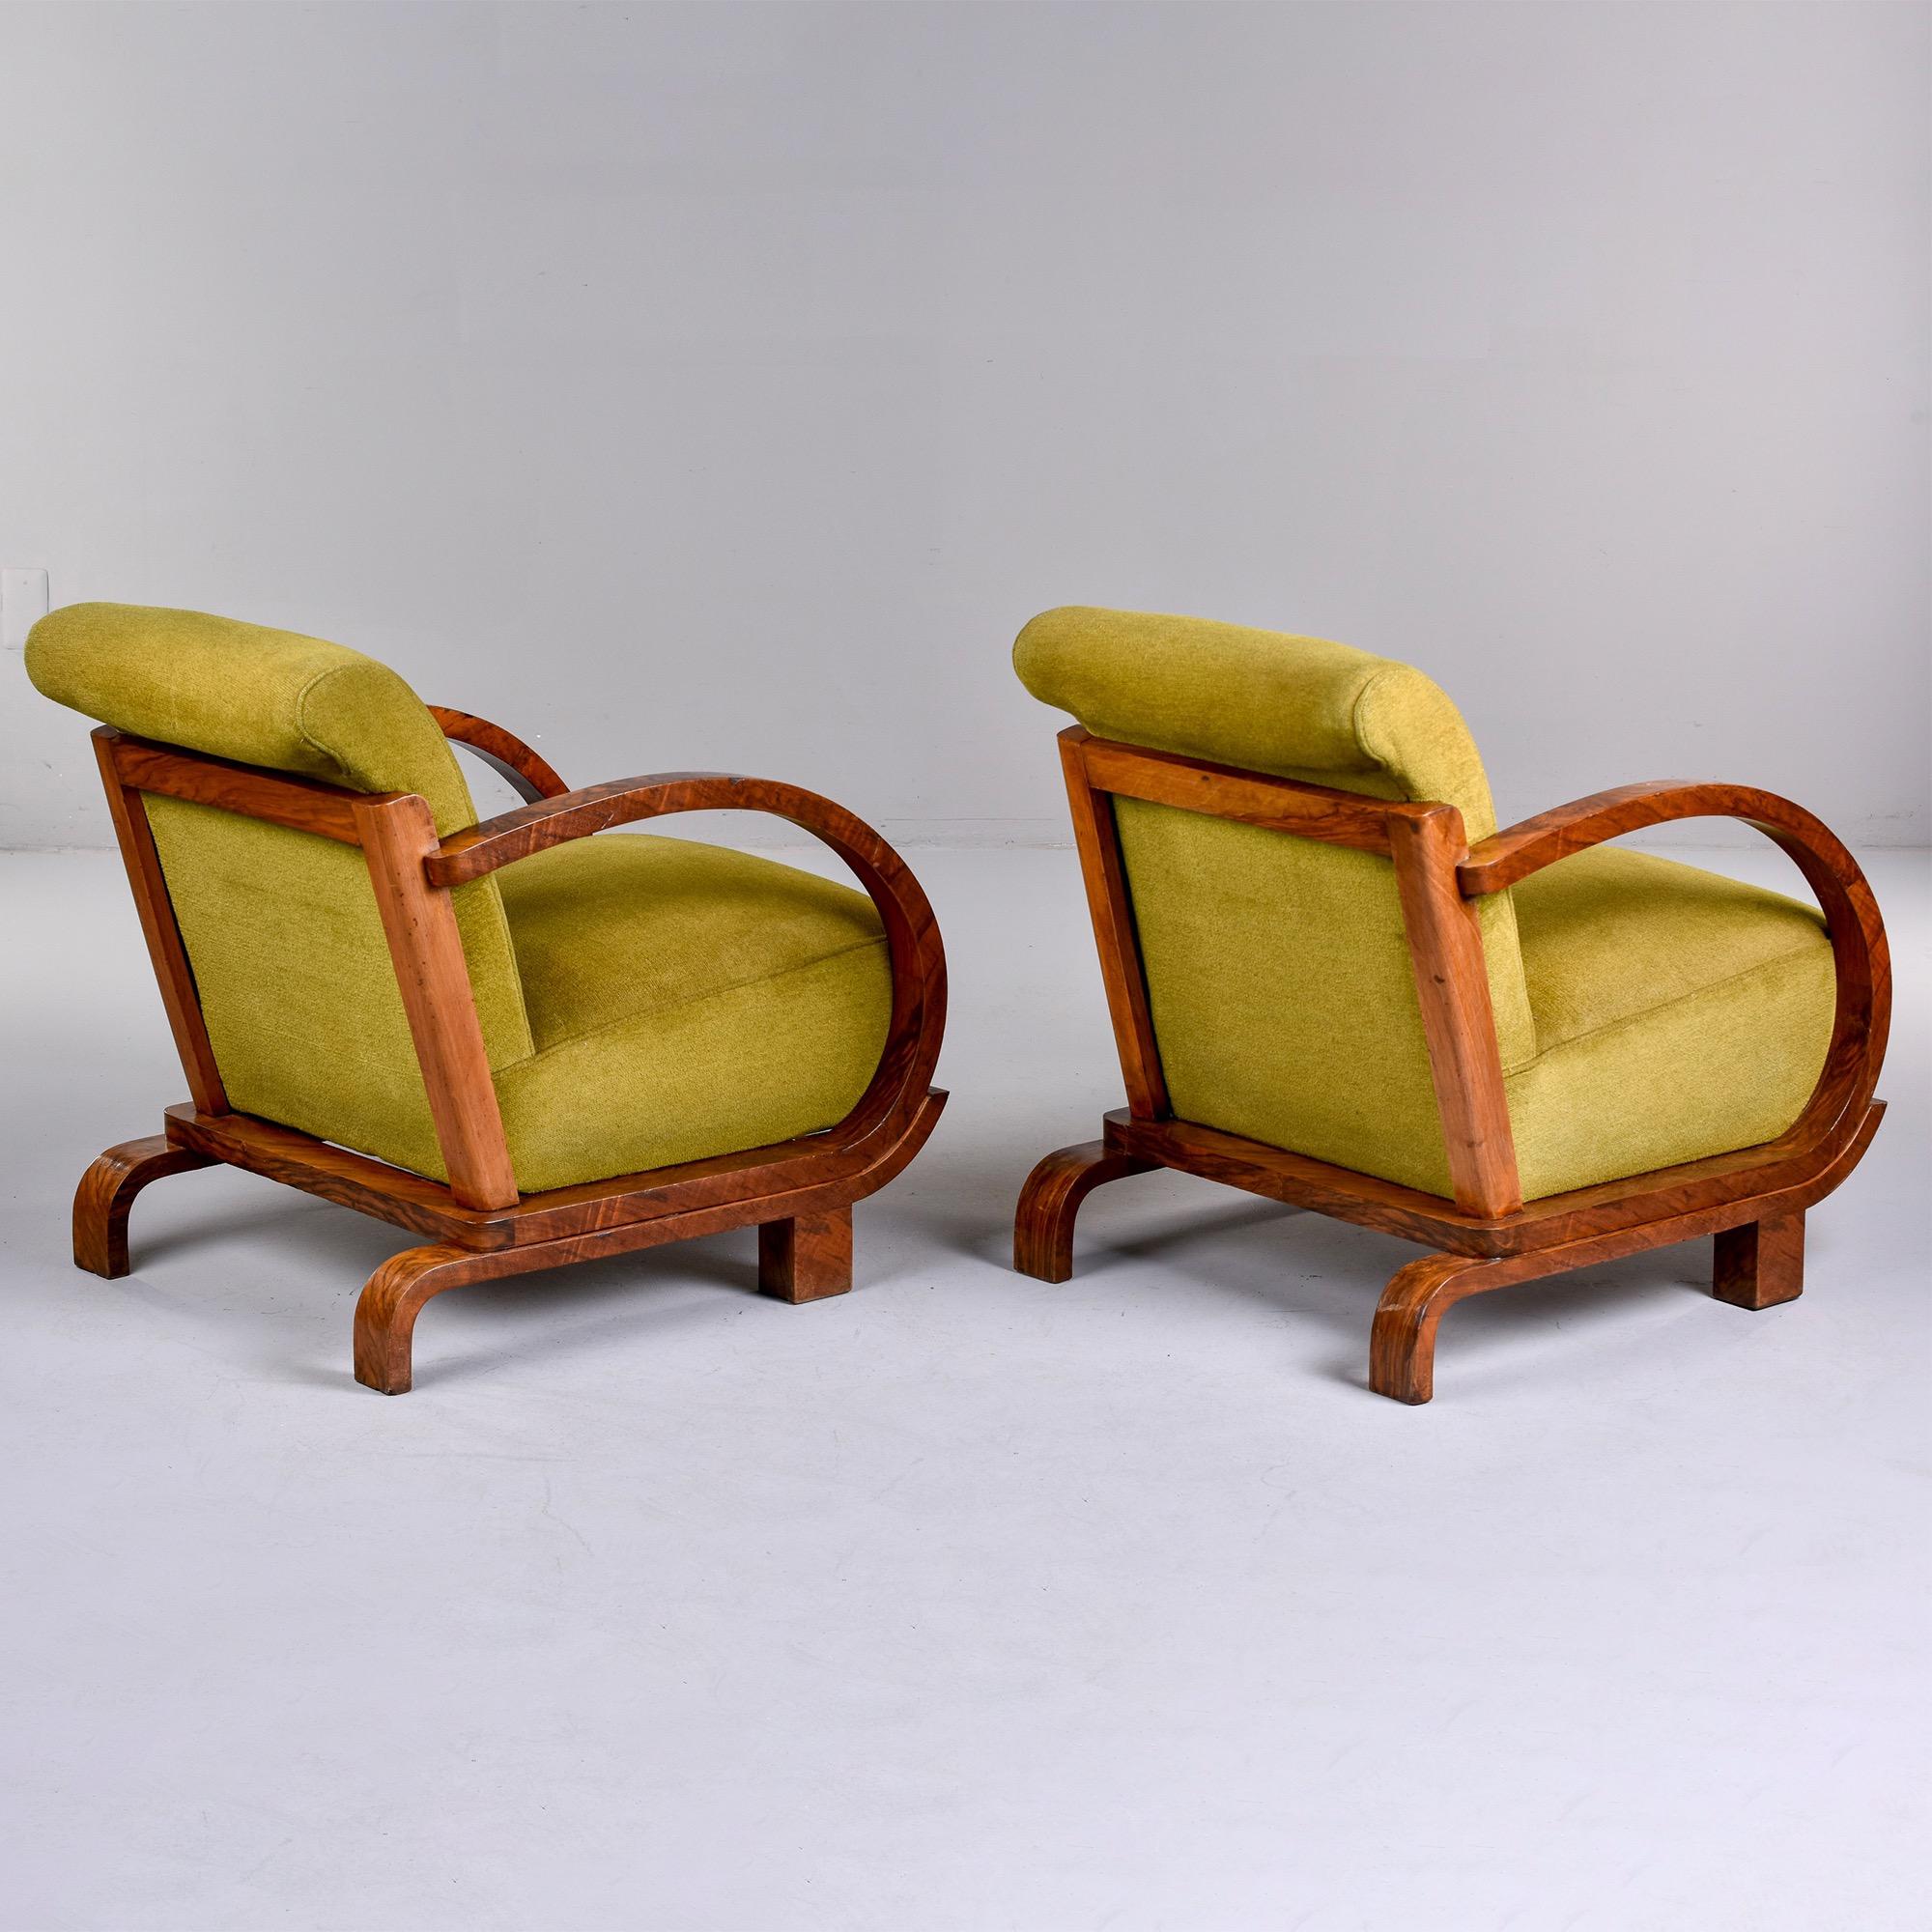 Pair French Art Deco Walnut Bentwood Armchairs with Original Upholstery 2